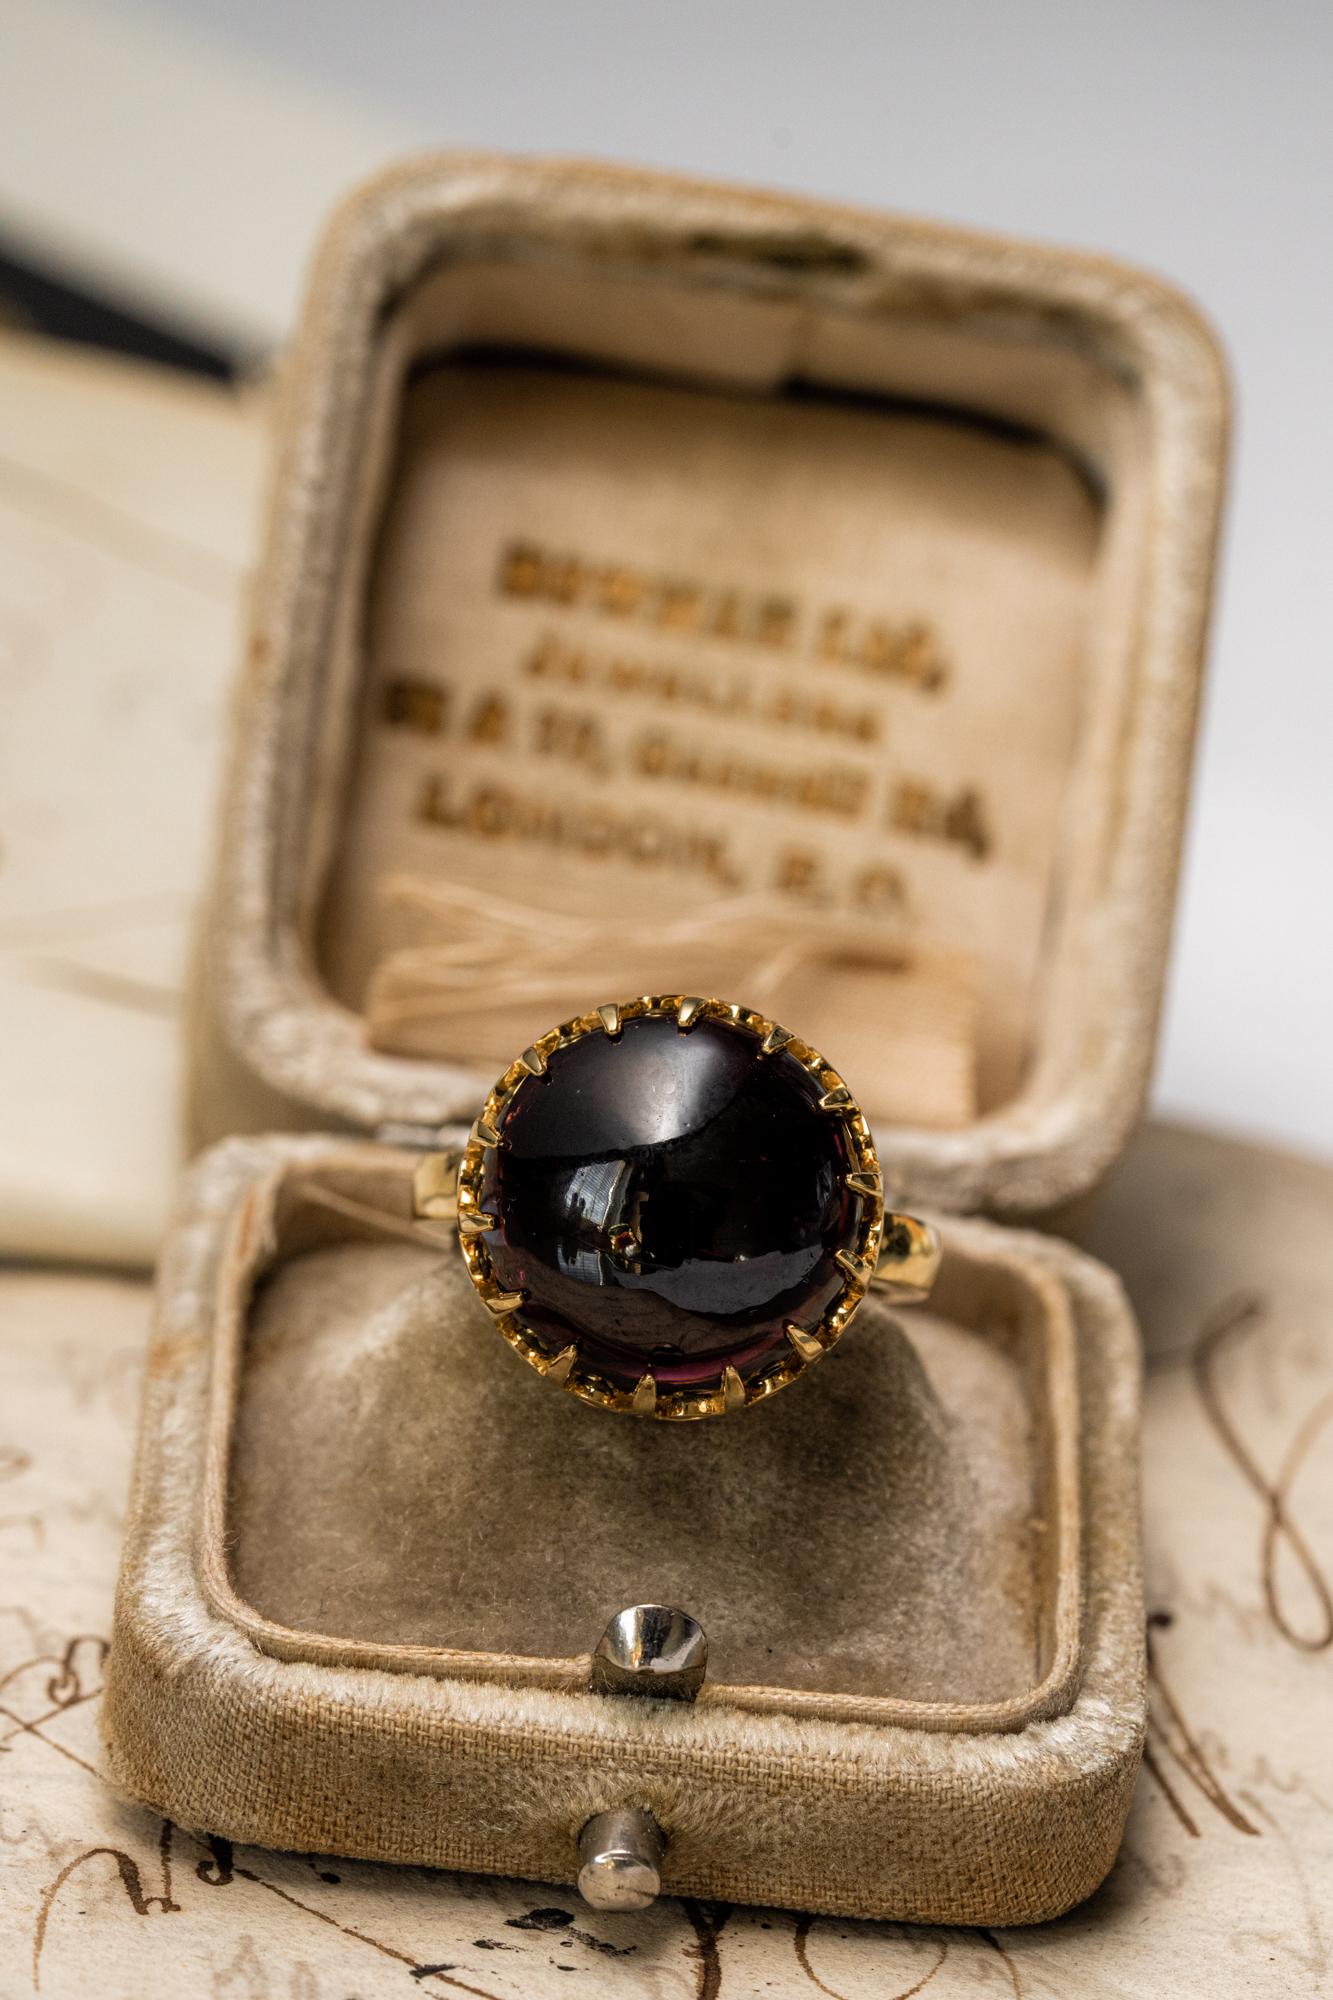 Unisex solid gold ring set with natural garnet cabochon. Antique Victorian revival of the old designs. This ring is skuilfully crafted by our bench from recycled gold and ethically sourced garnet. 

Details: 
Metal: solid 10k yellow gold;
Stone: